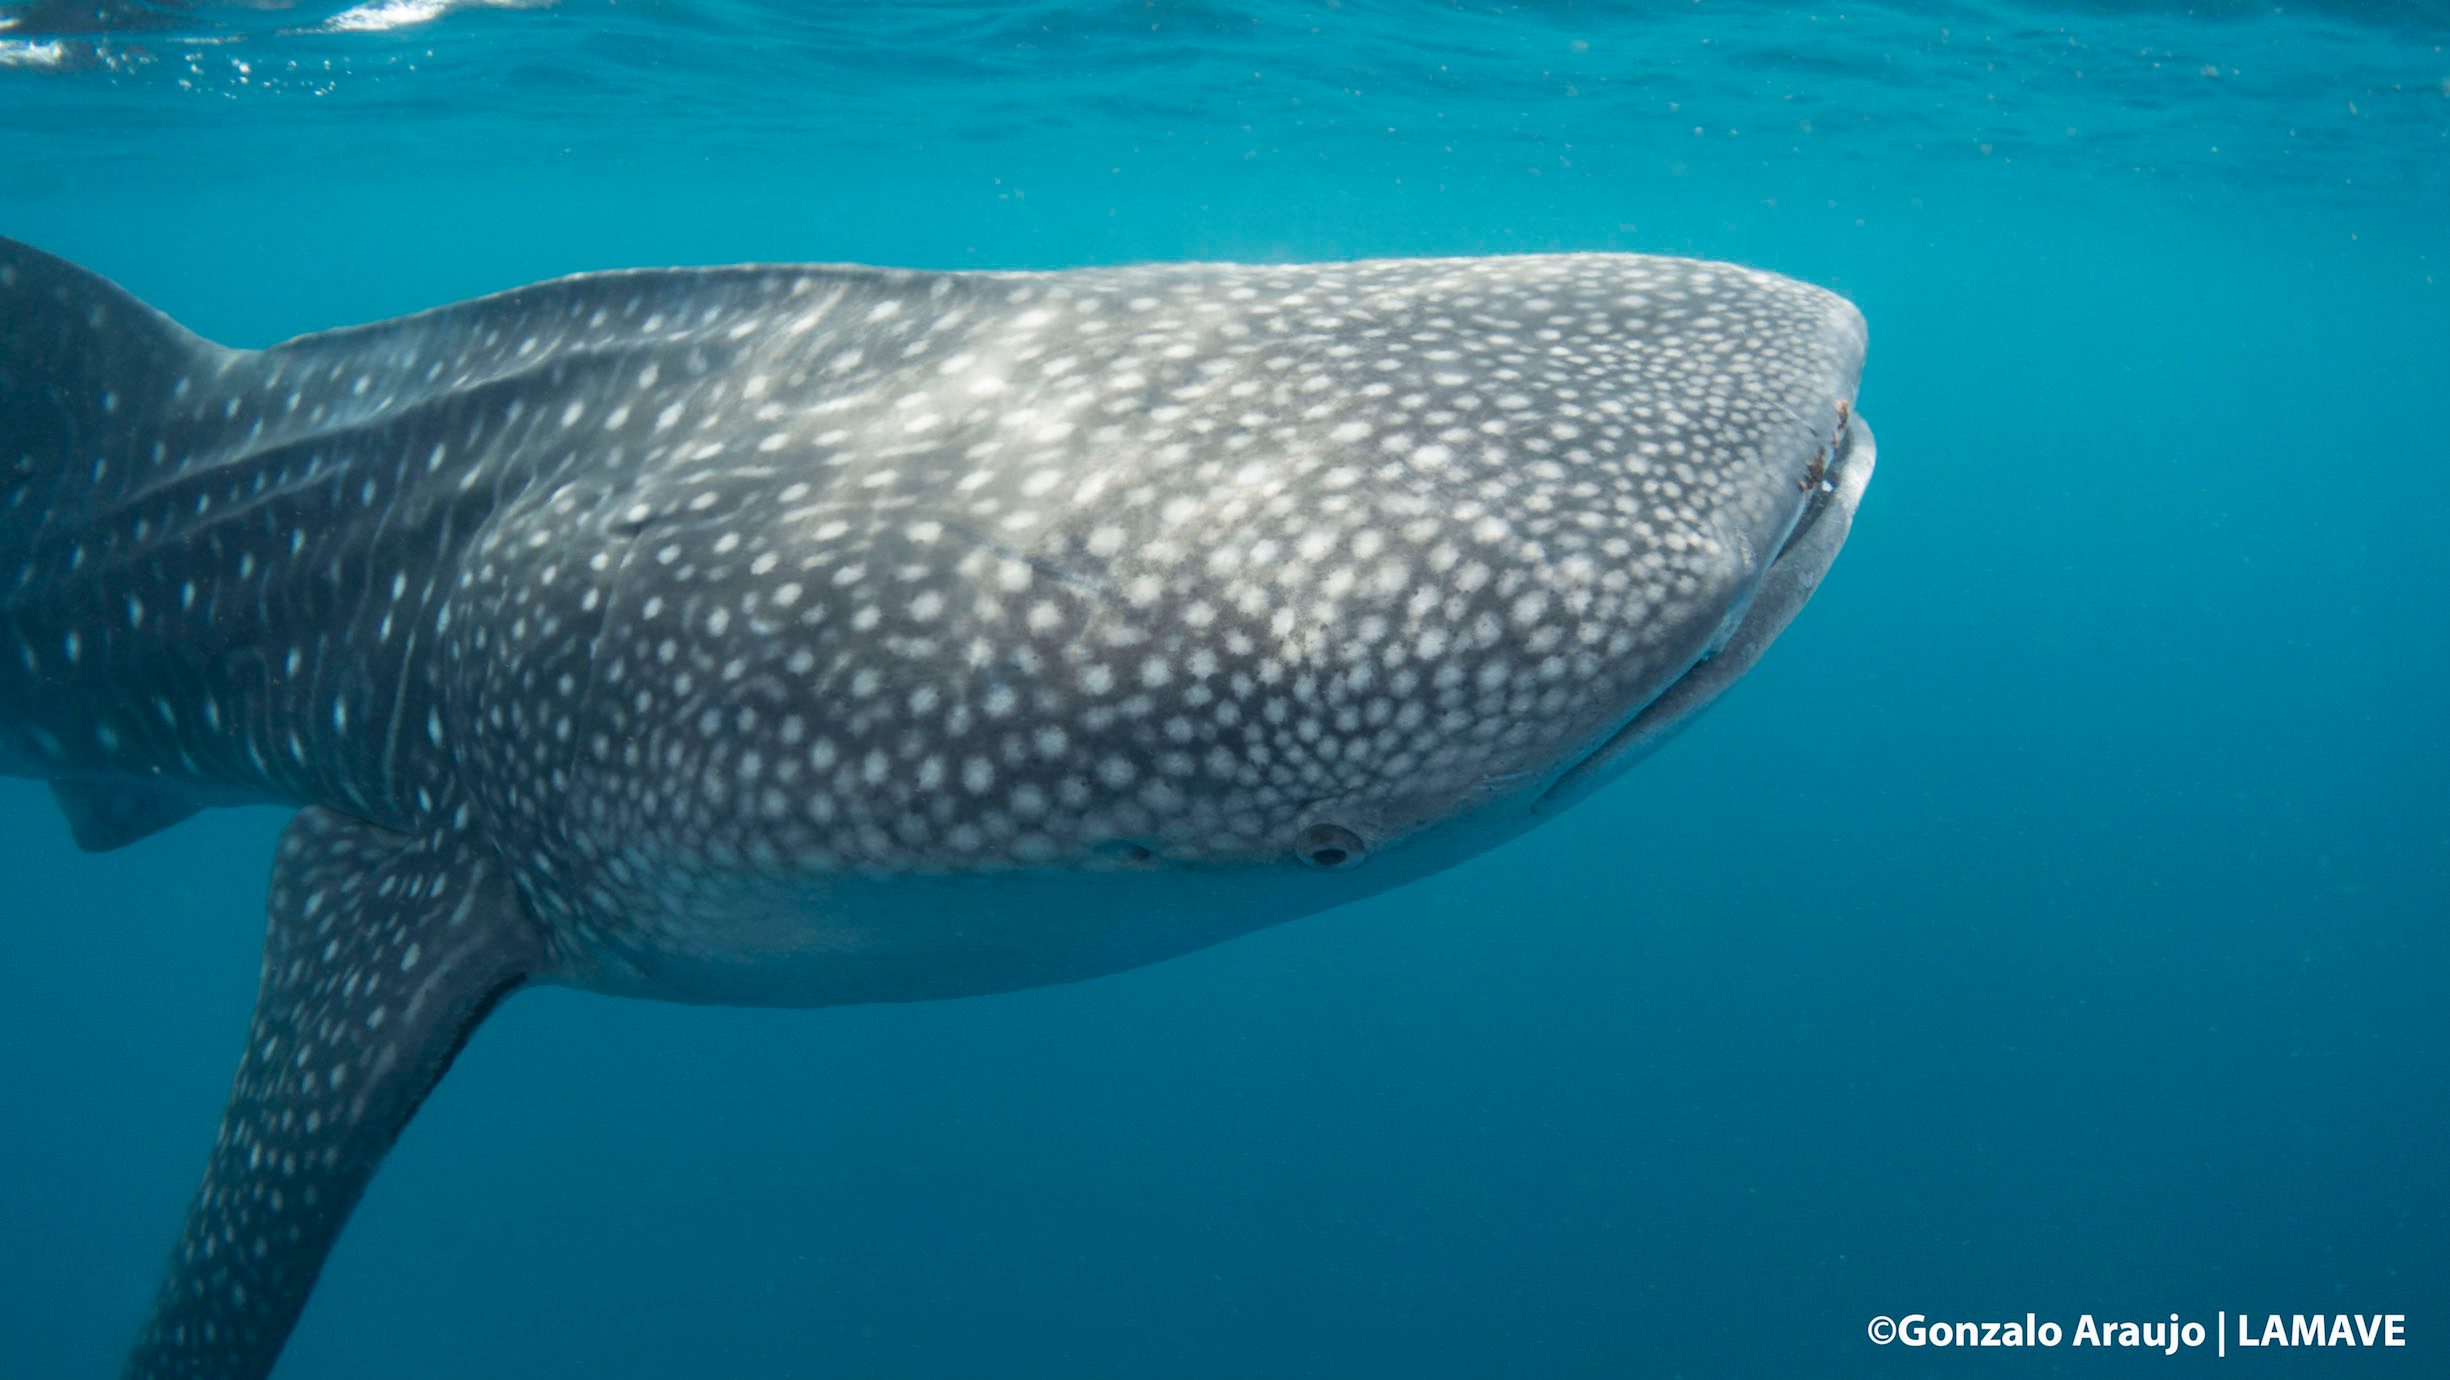 900th whale shark found in the Philippines